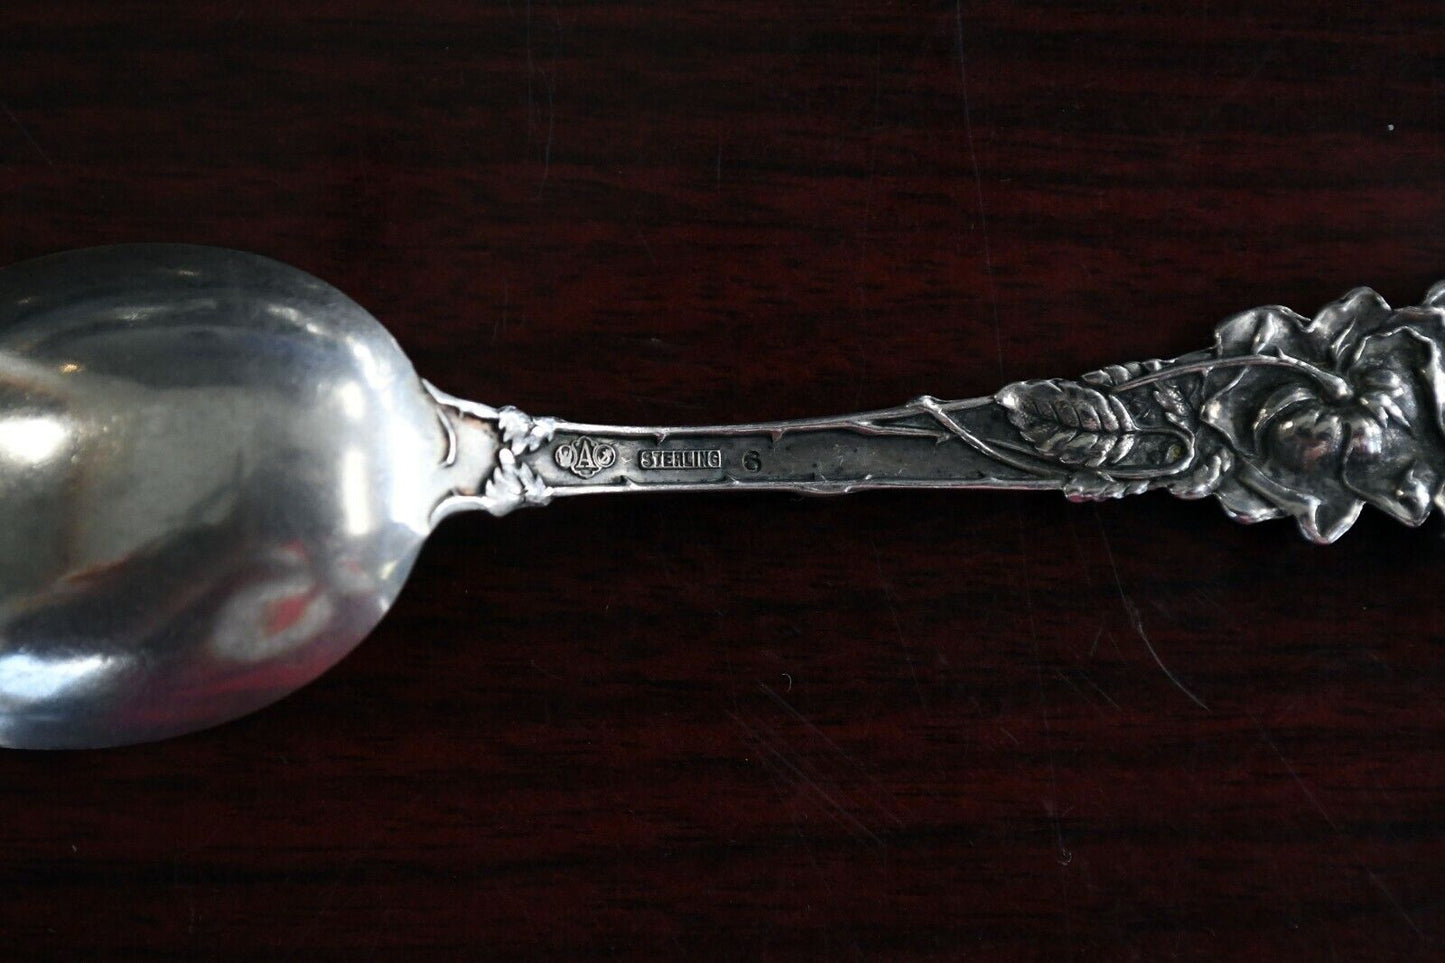 Rose by Alvin .79 oz. Sterling Silver Five O' Clock Spoon 5 1/2"